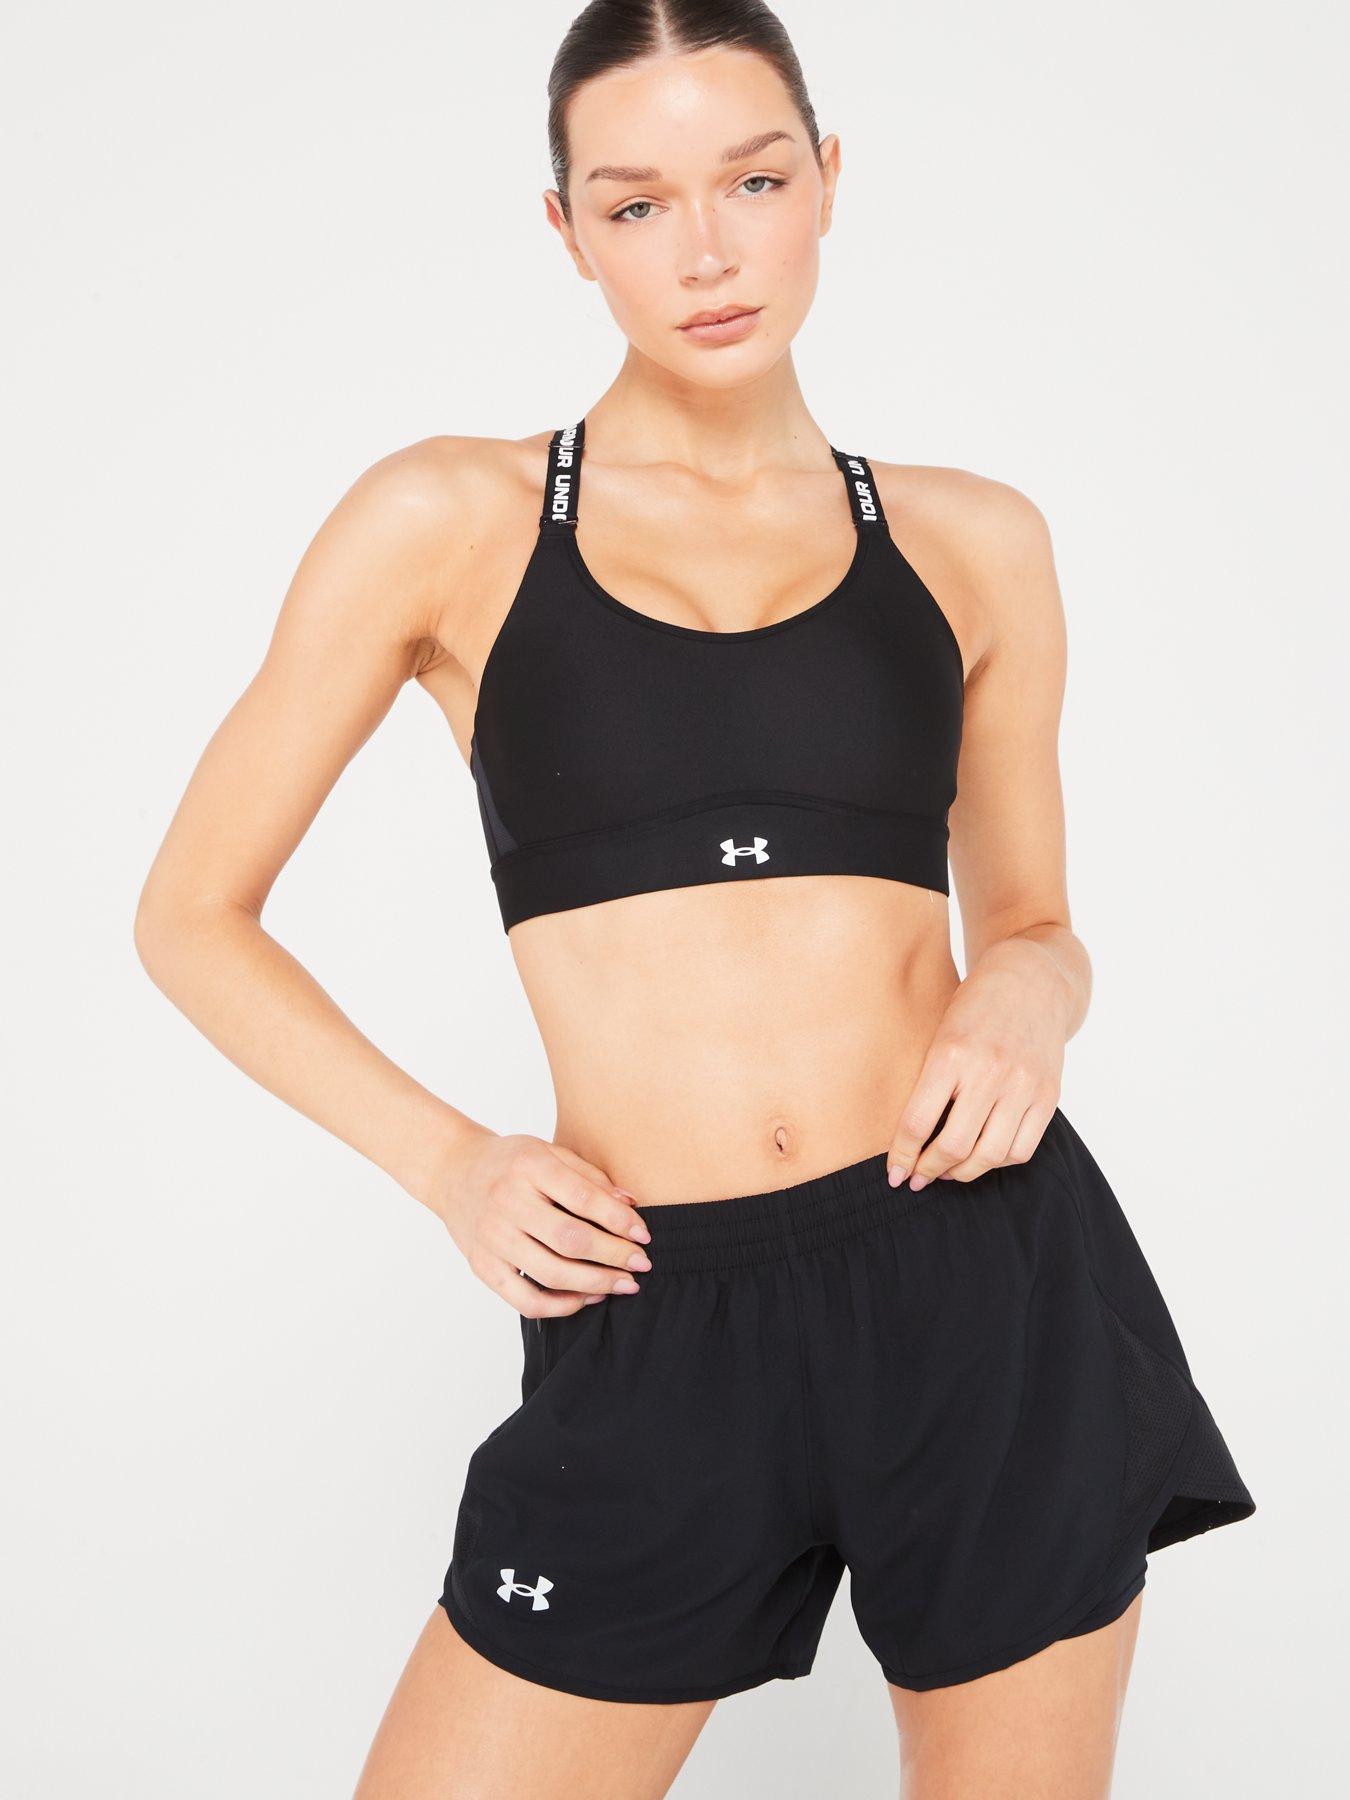 Buy Sports Bras - Womens At   Express Shipping Available  – McKeever Sports IE